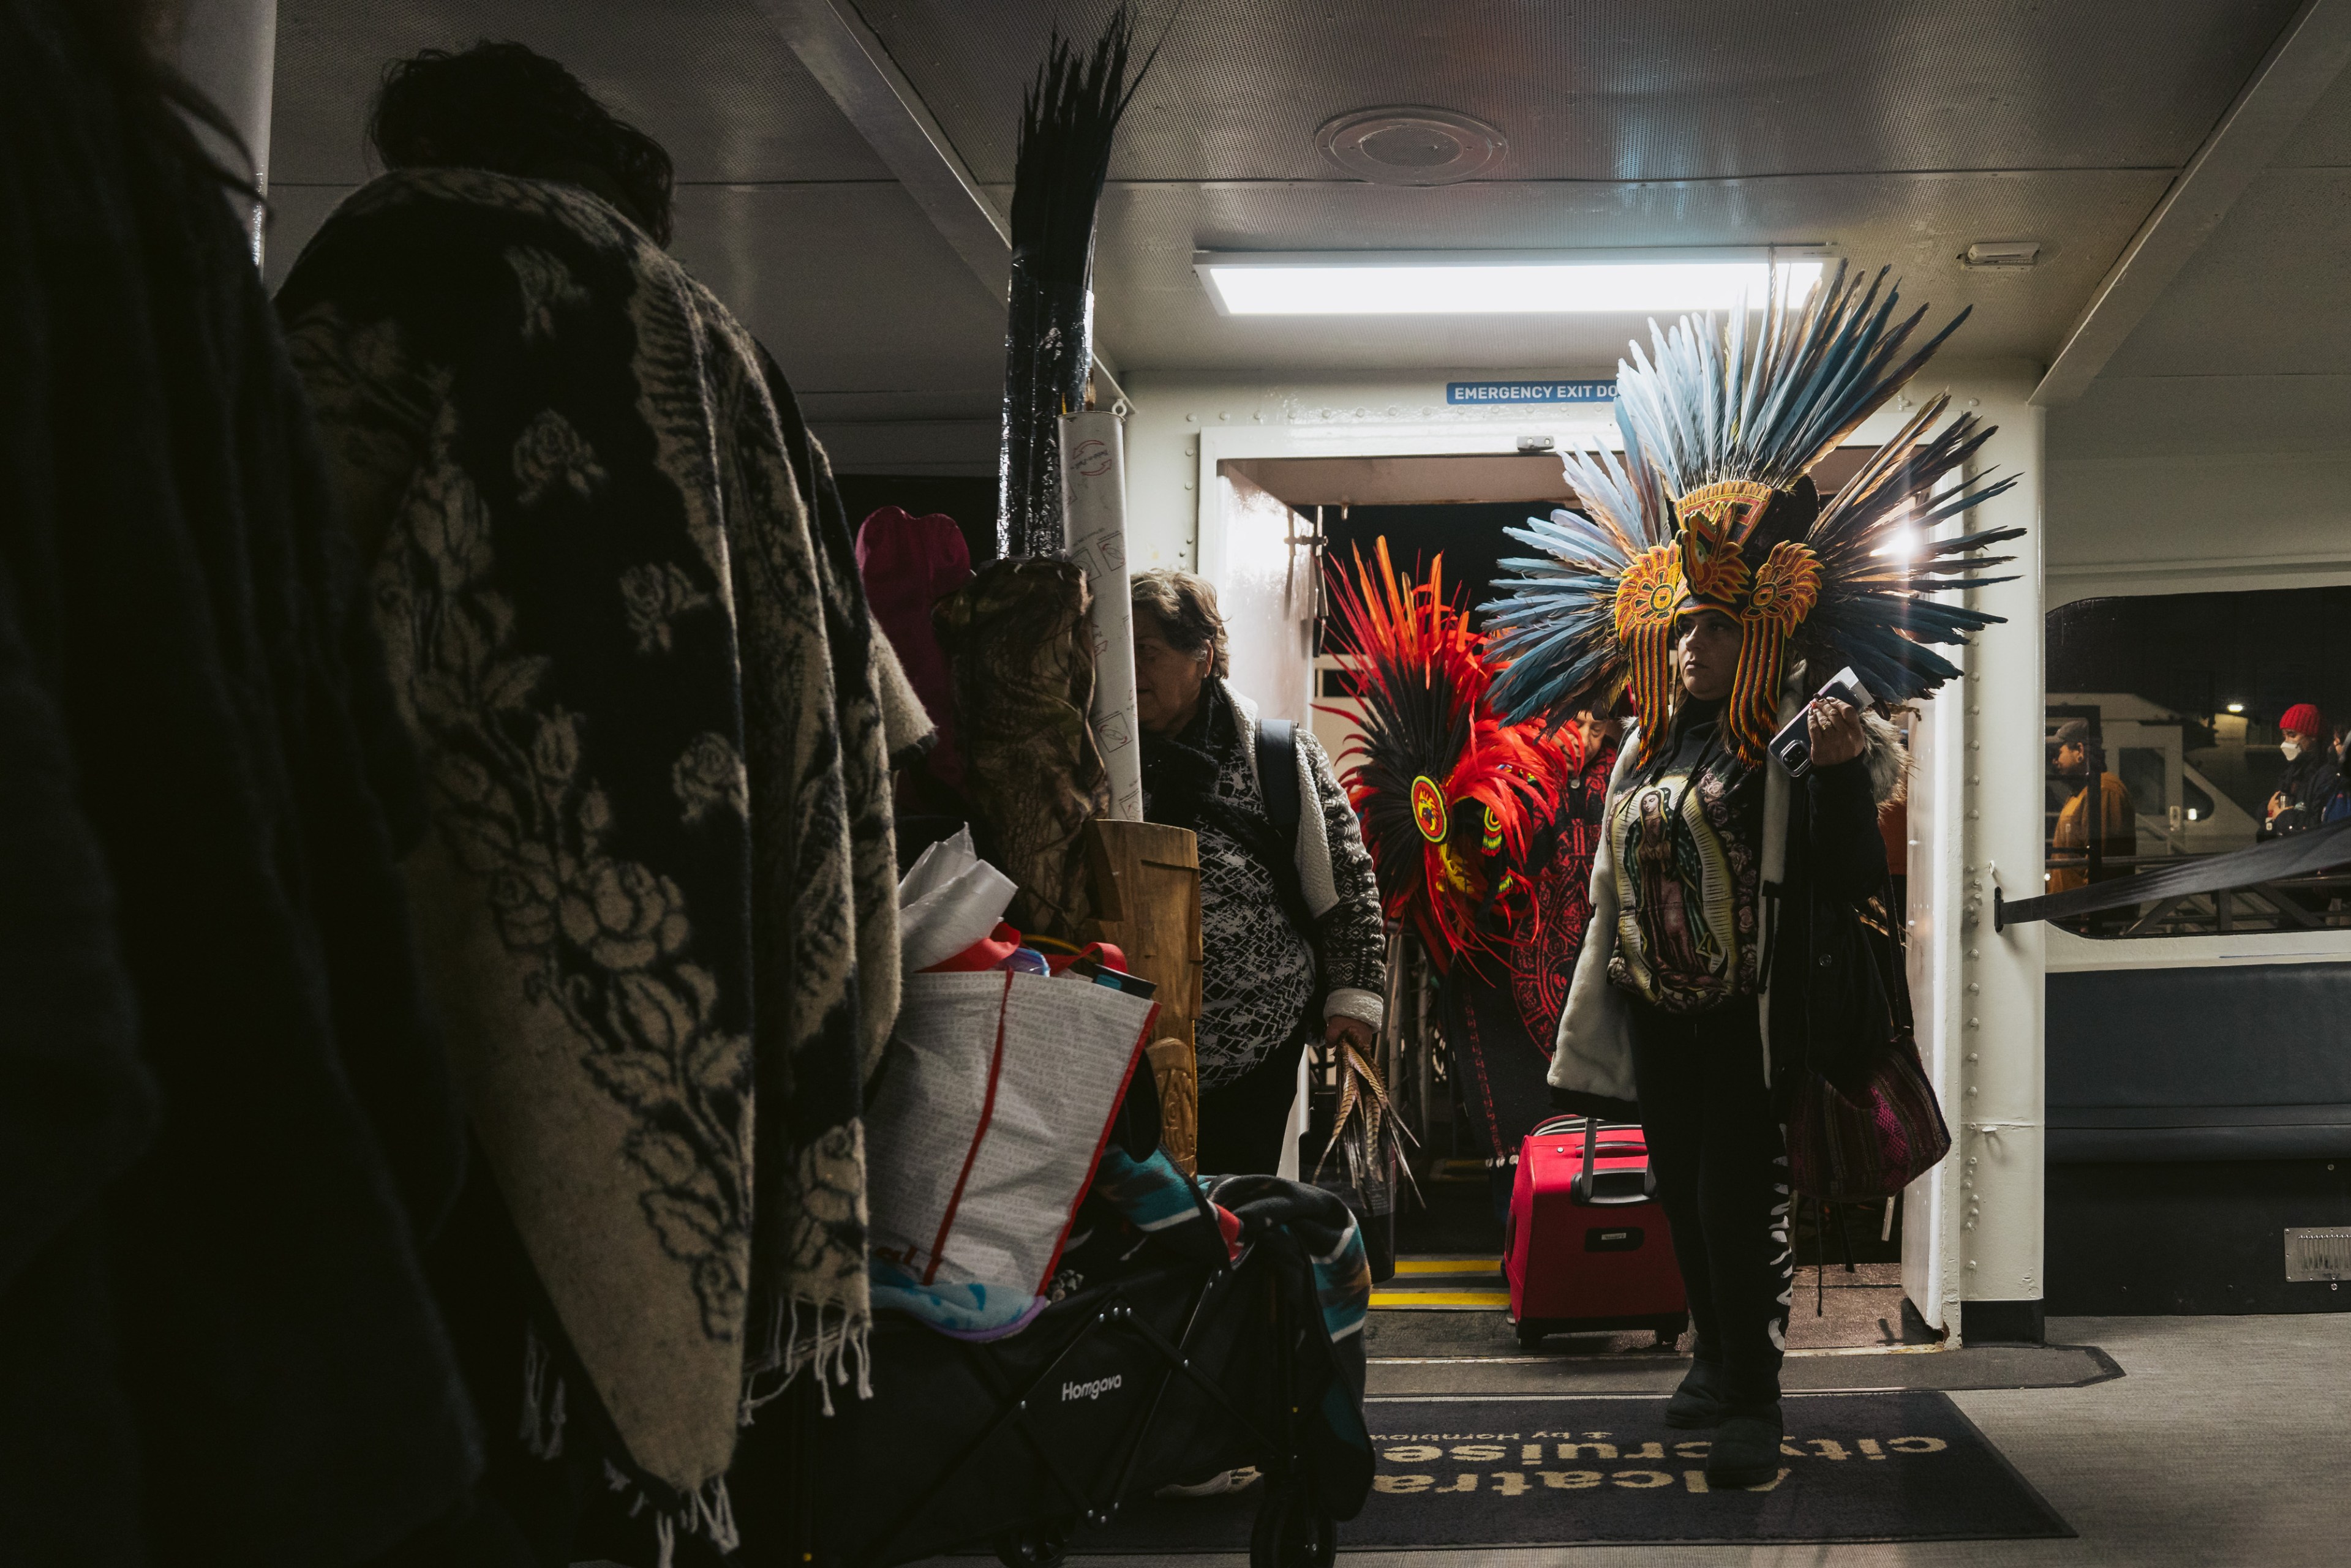 People adorned in indigenous regalia walk into the cabin of a ferry boat.